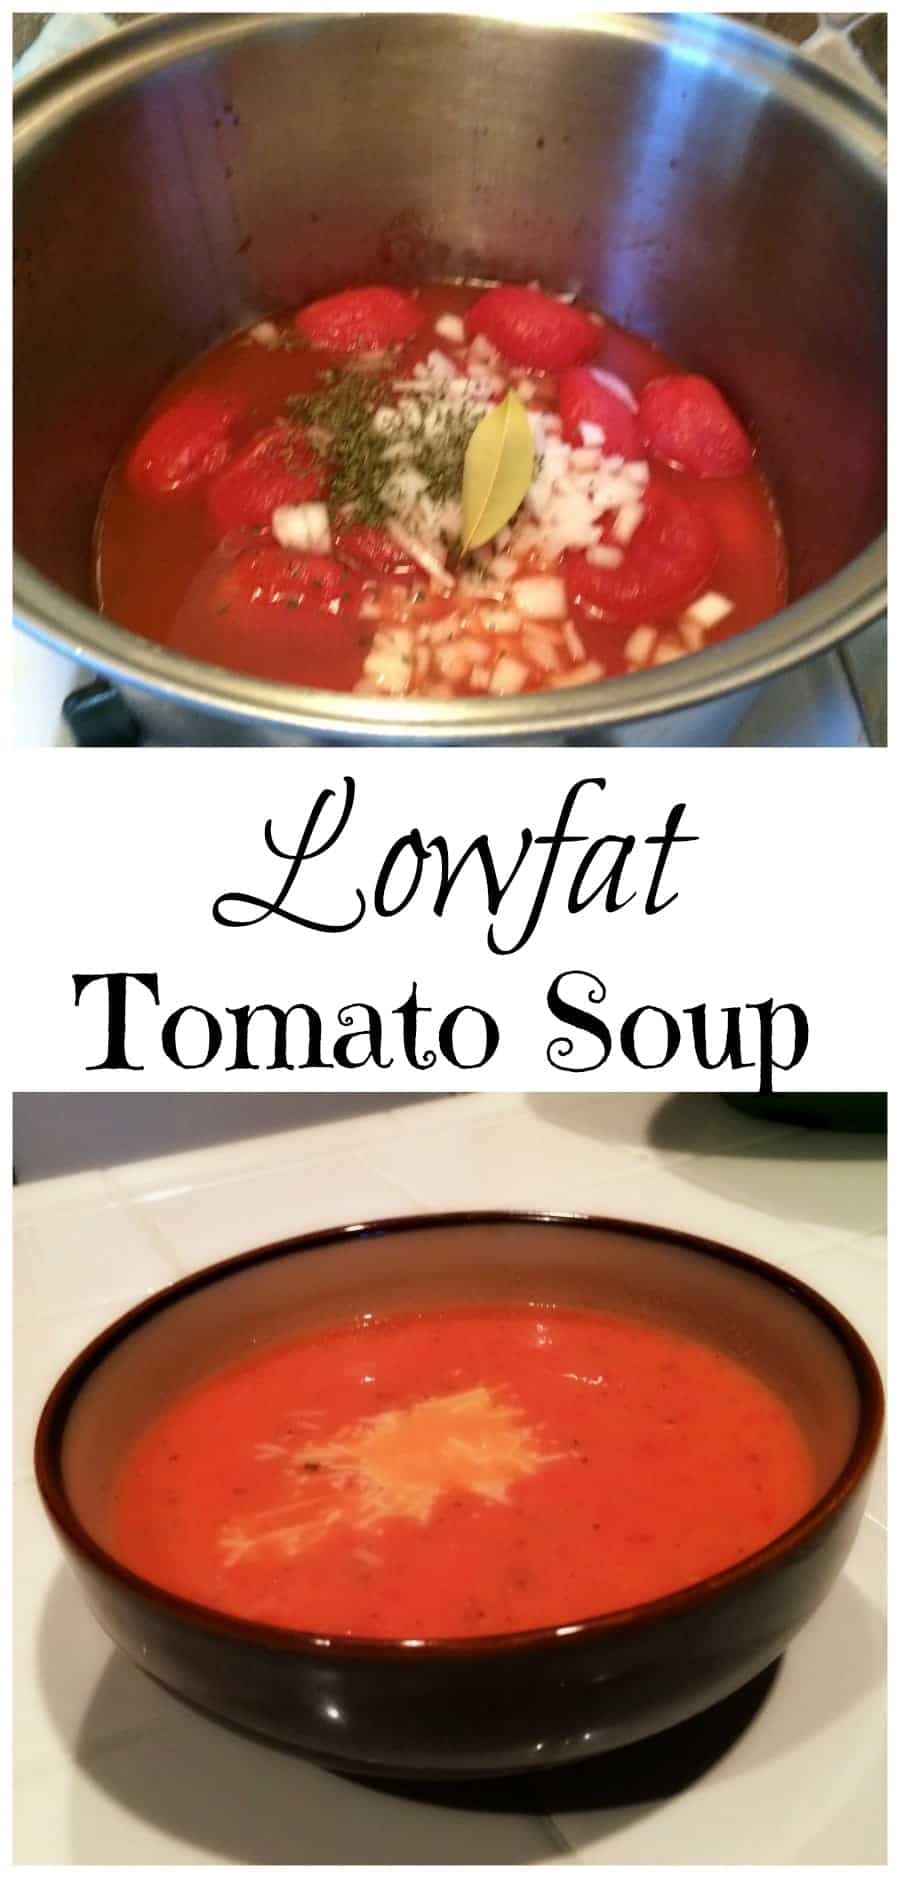 Make Your Own Tomato Soup